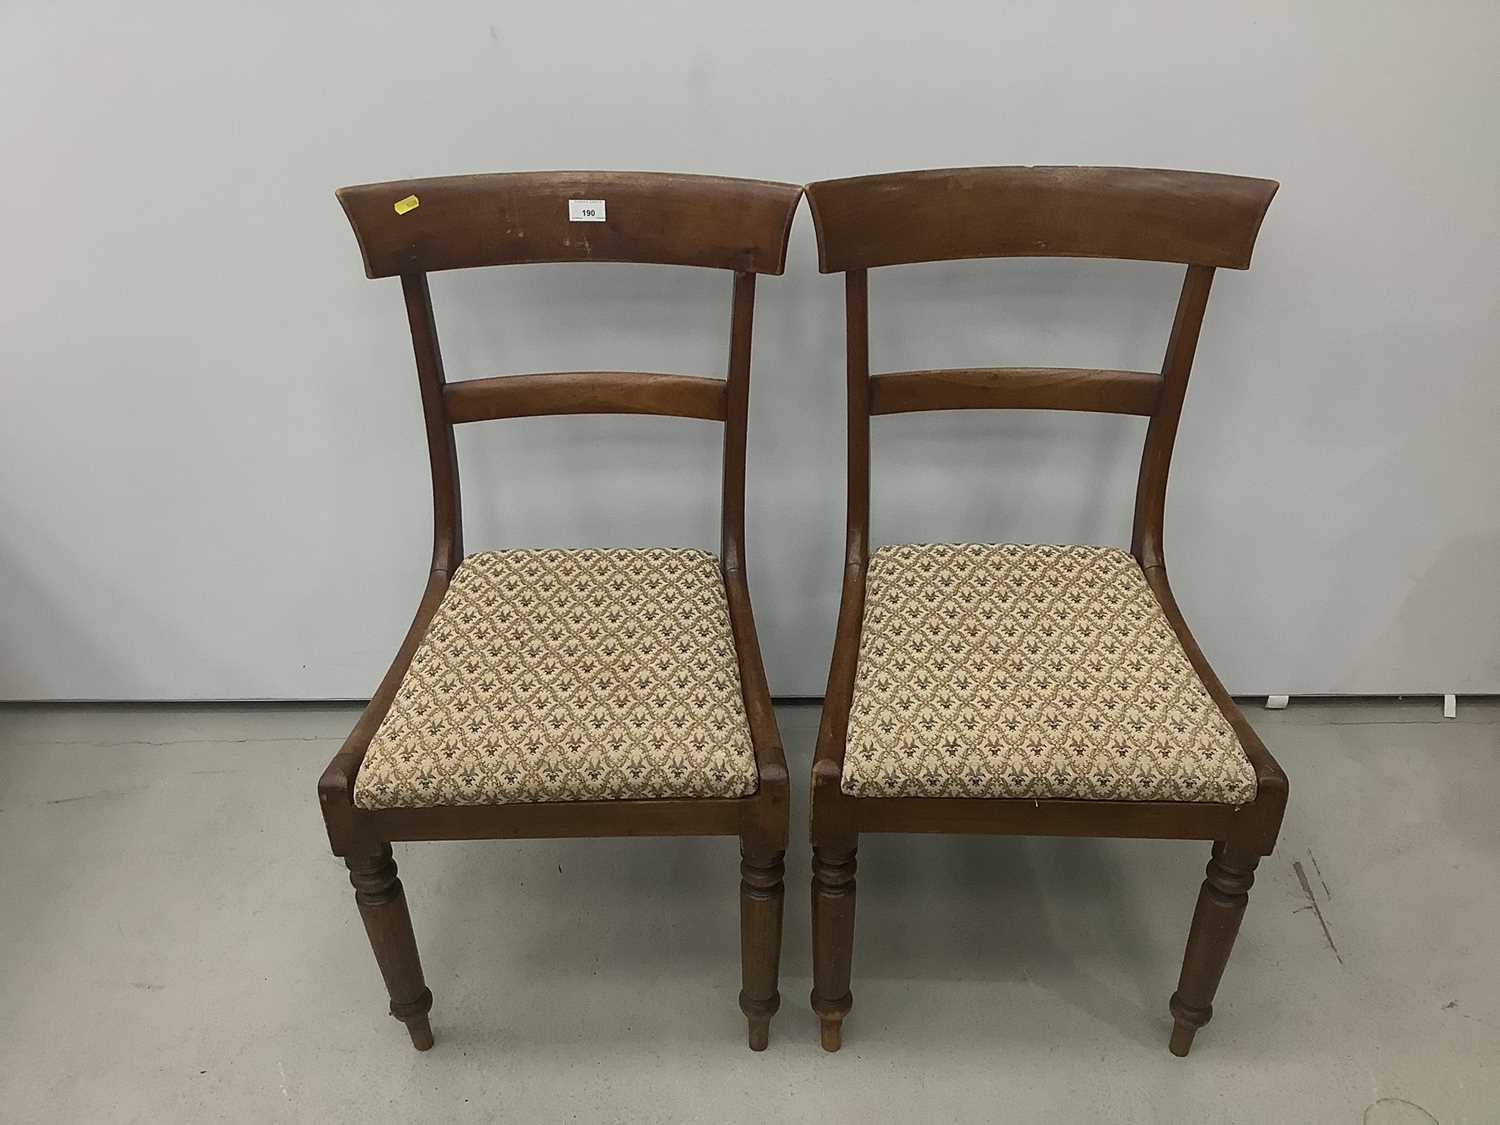 Lot 190 - Pair of antique mahogany bar back dining chairs with drop in seats on turned front legs.